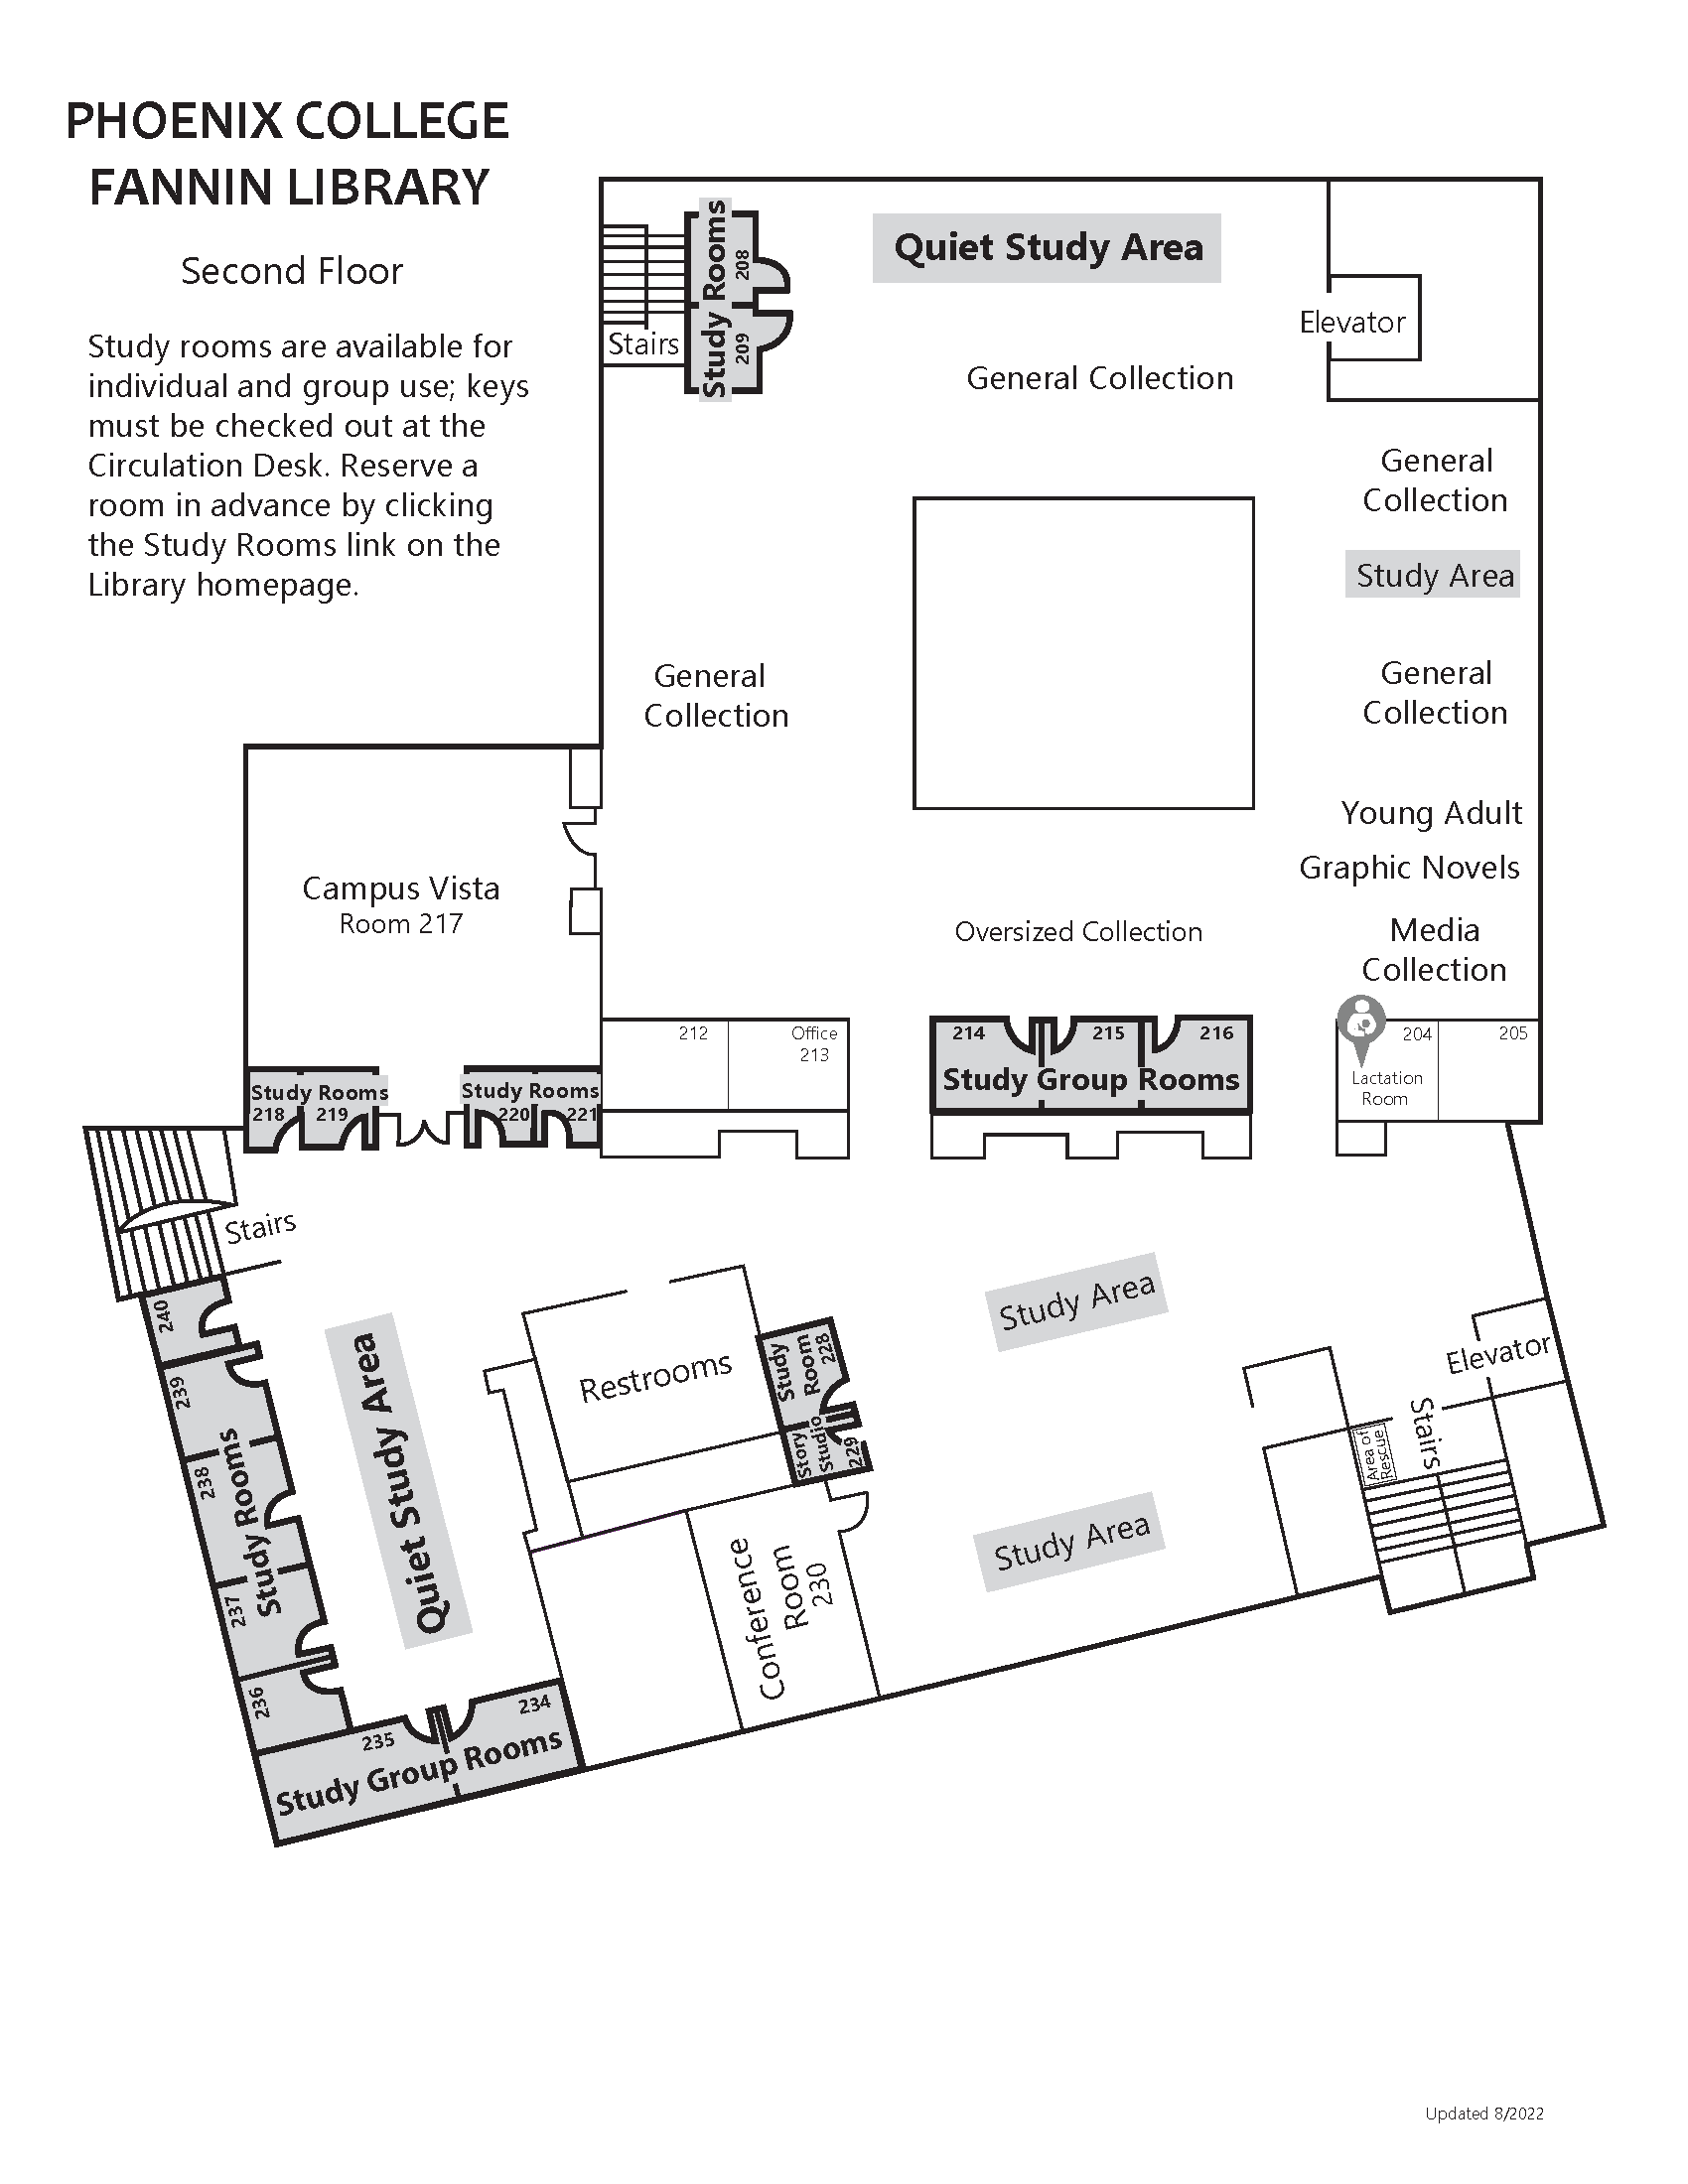 Library map